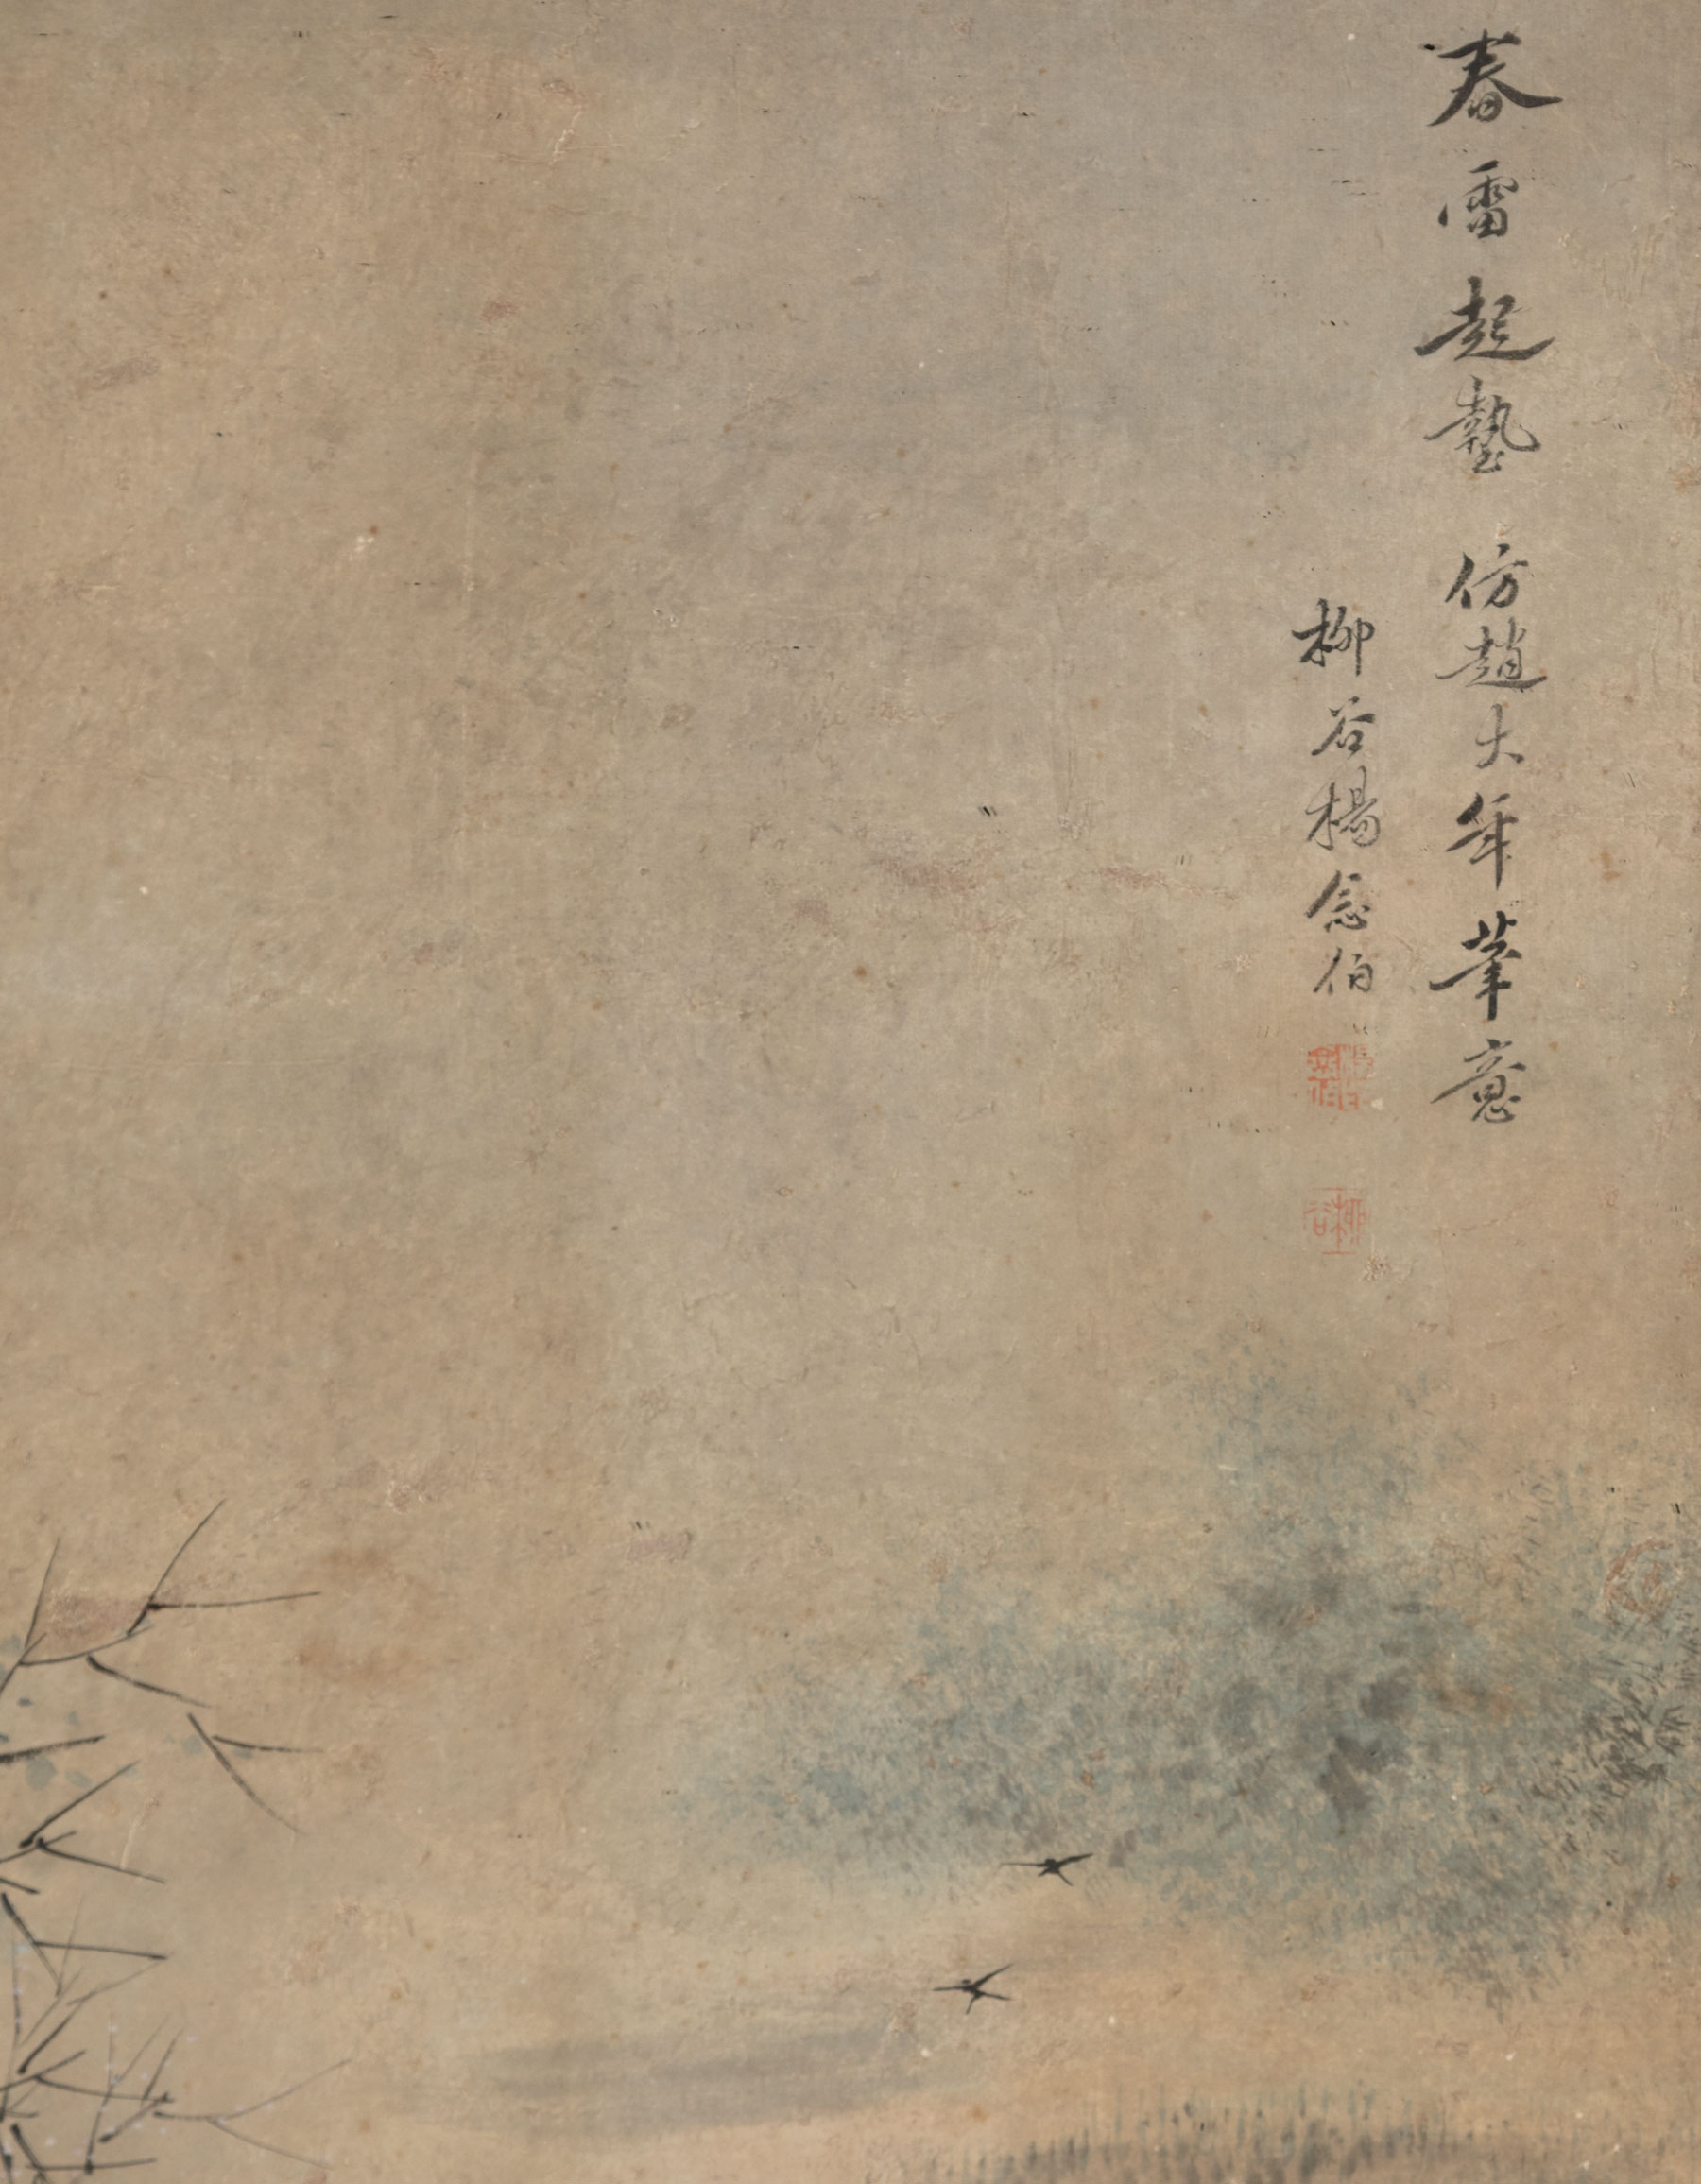 Yang Nianbo (Chinese, c. 1830-1890) , "Grateful for the Impending Spring Rain", ink and color on - Image 2 of 2